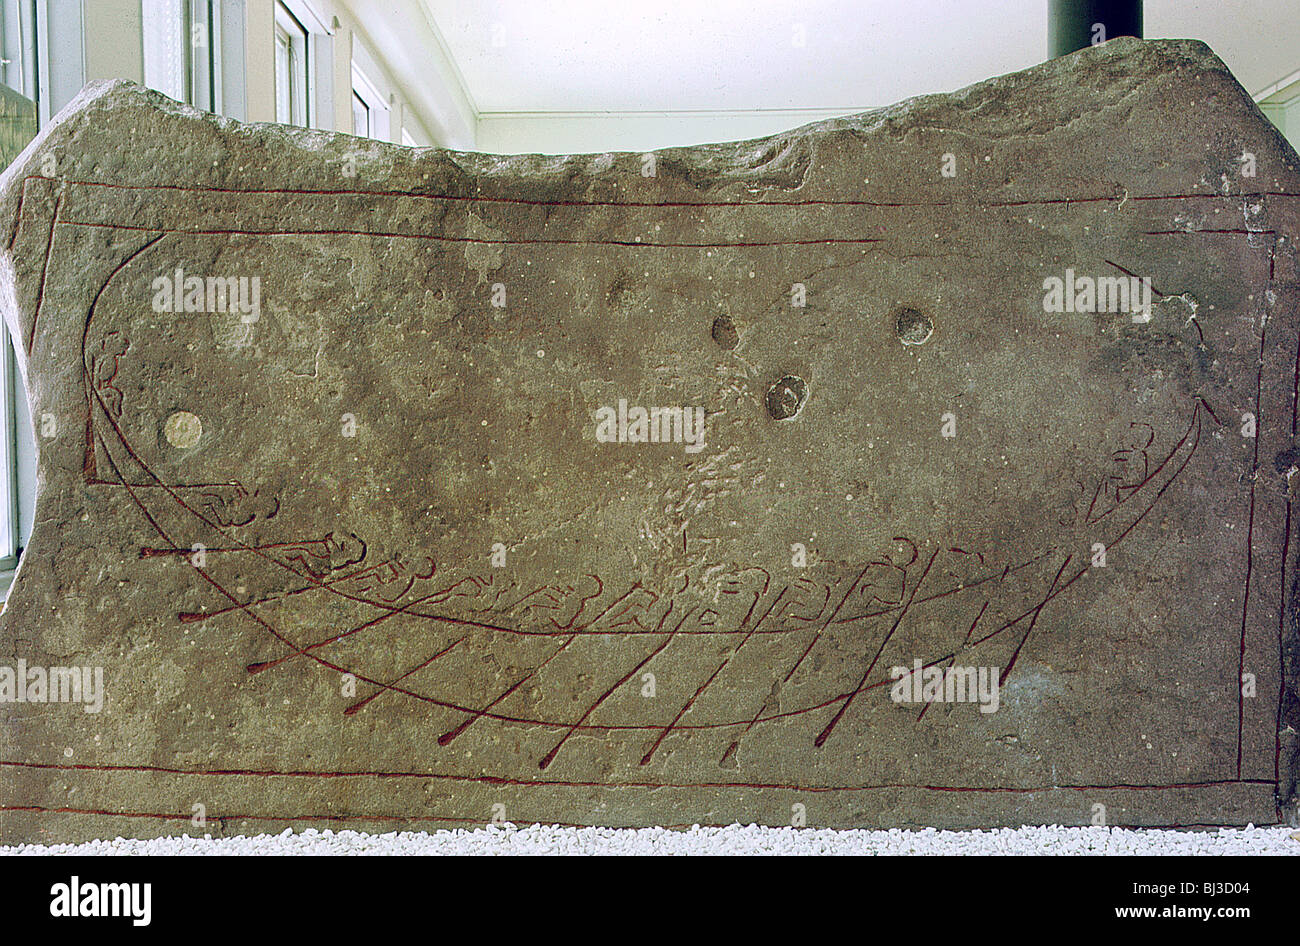 Limestone stele incised with design of a boat, pre-Viking, Uppland, Sweden, 500 AD. Artist: Werner Forman Stock Photo